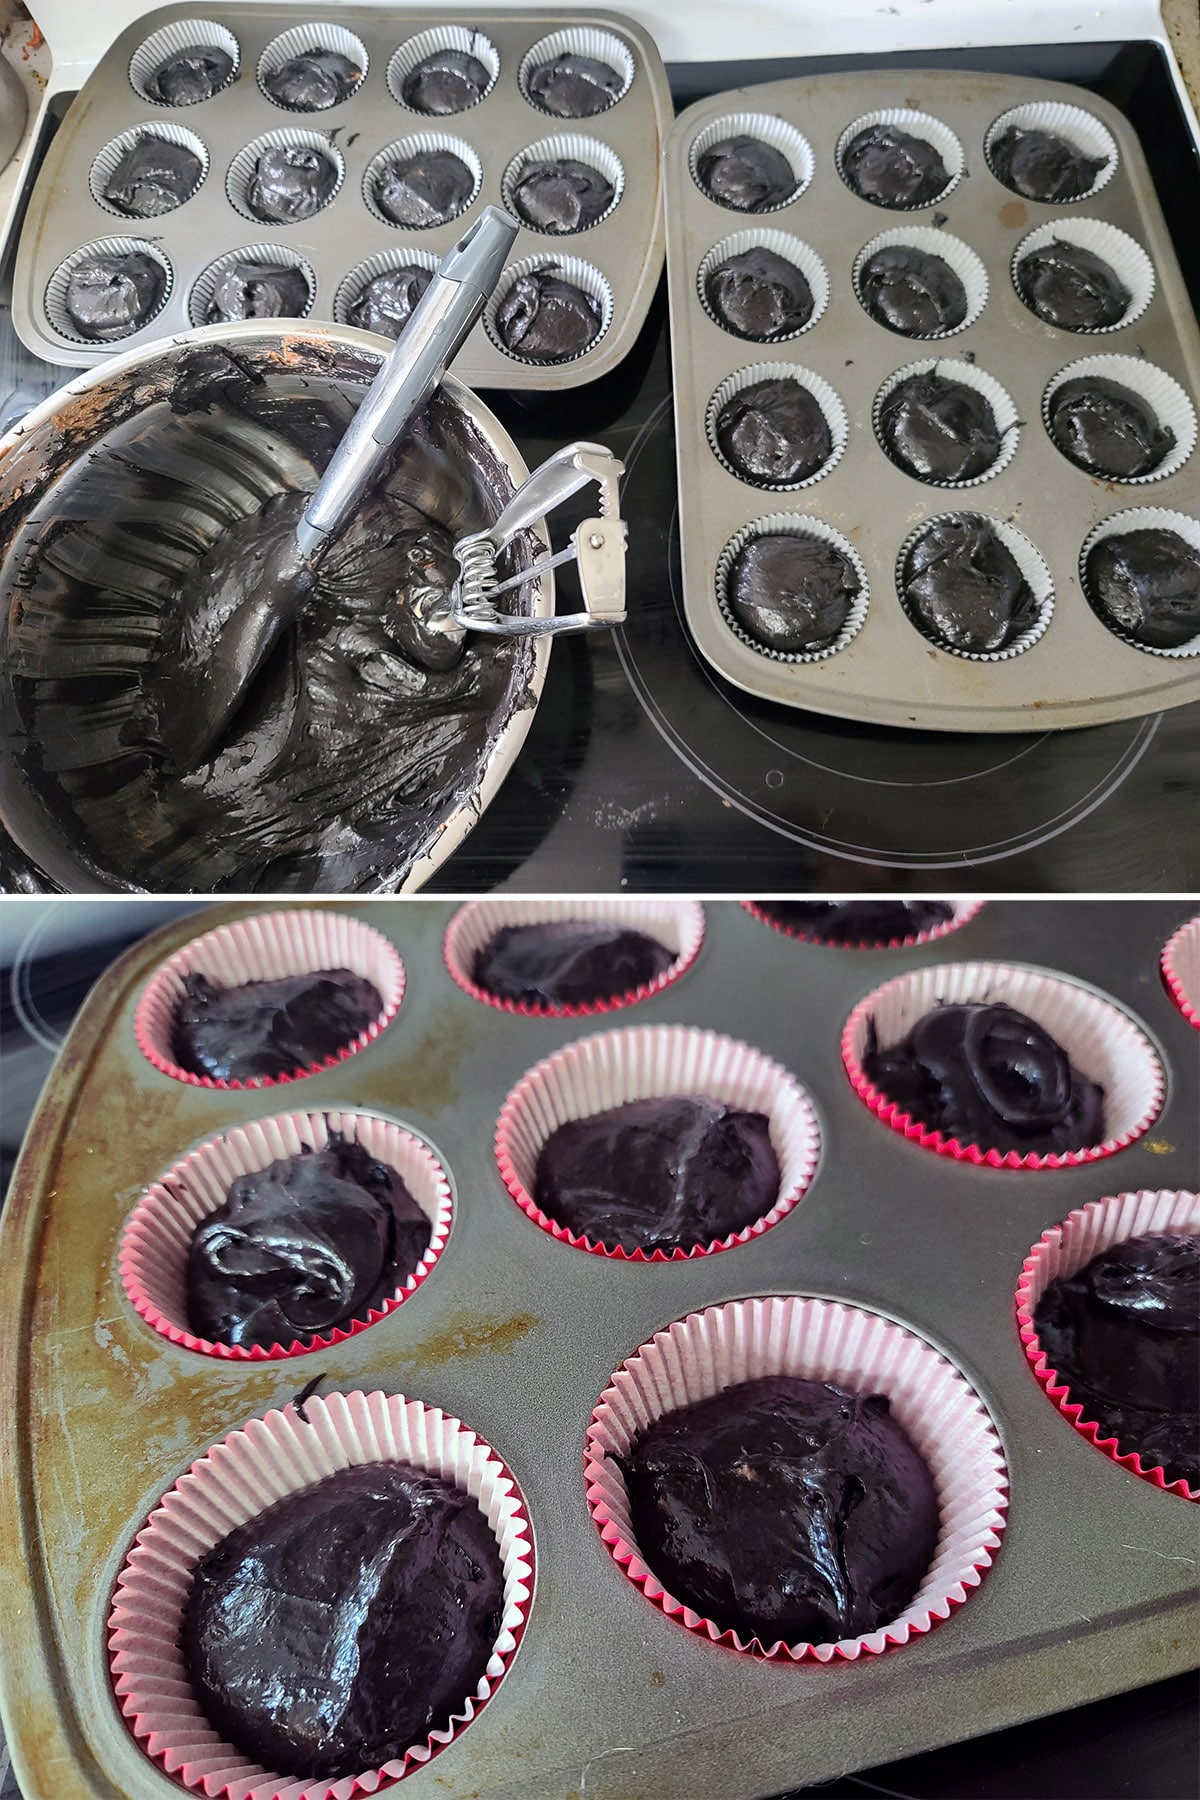 A 2 part image showing the black velvet cupcake batter being scooped into muffin pans lined with paper liners.